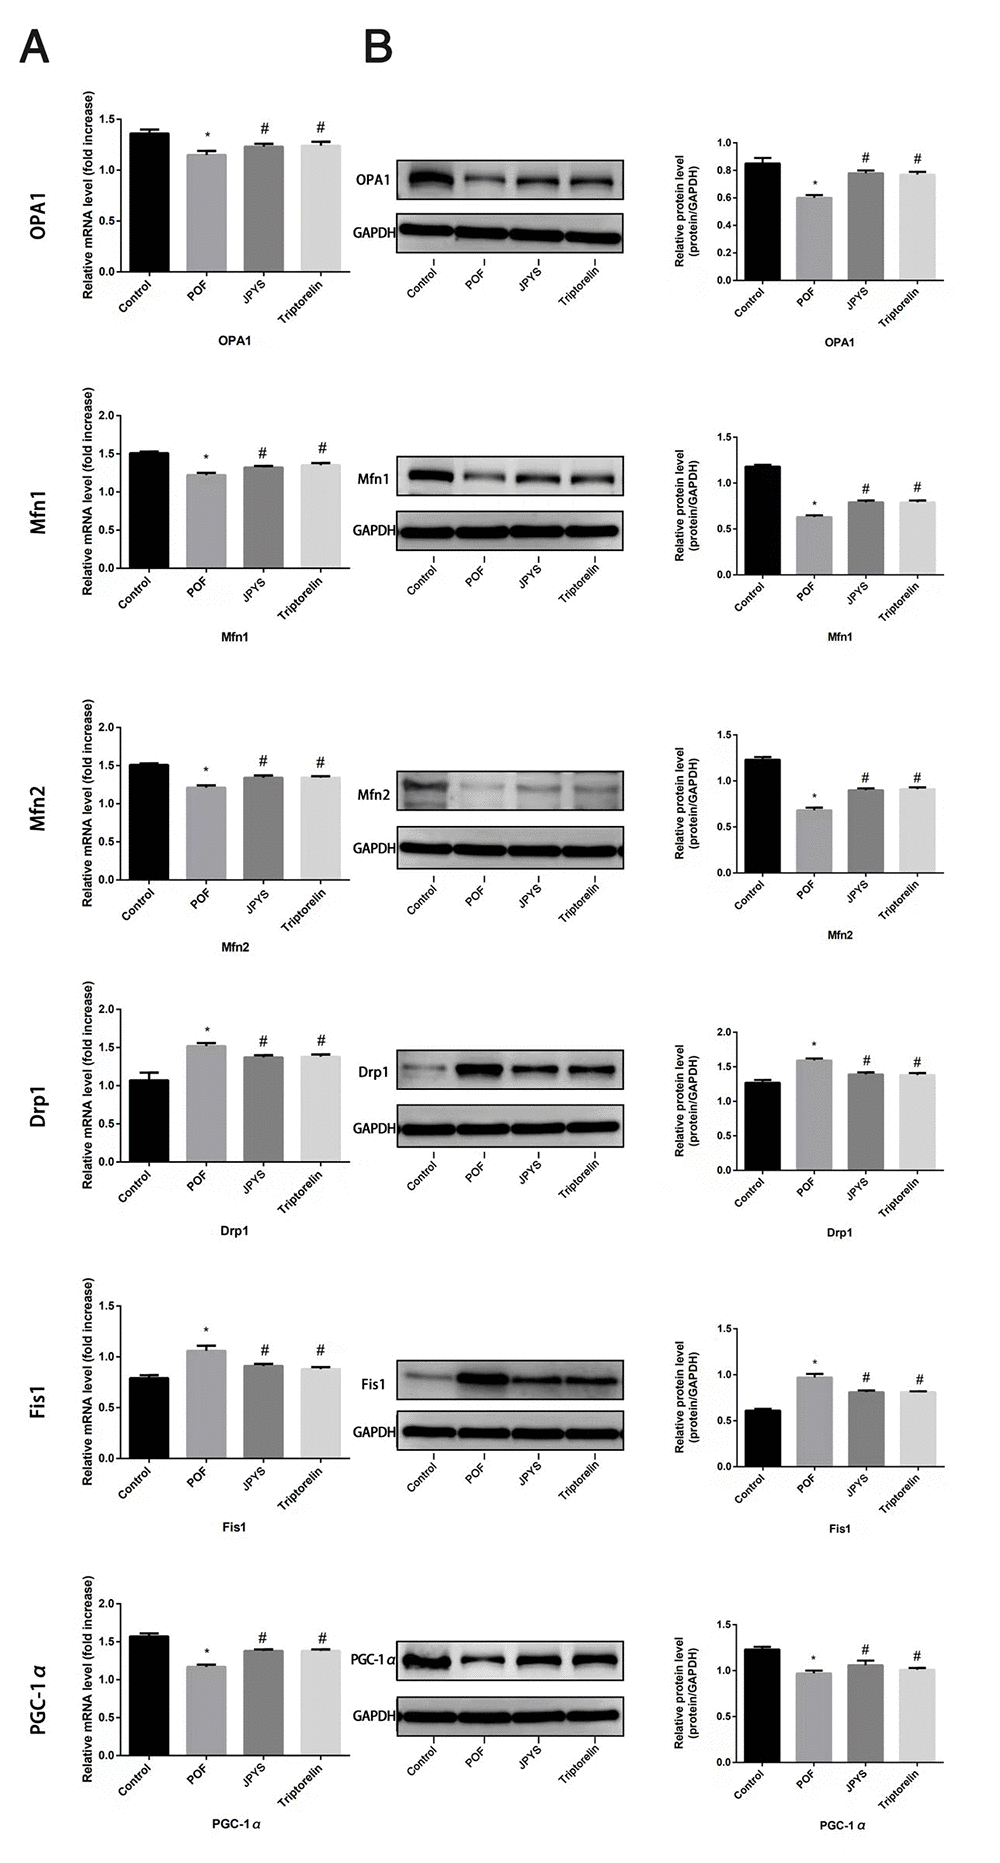 JPYS improved mitochondrial biogenesis and dynamics in premature ovarian failure (POF) rats. Rats were treated with JPYS (11.0 g/kg.d) and pre-treated with triptorelin (1.5 mg/kg) followed by intraperitoneally injected cyclophosphamide (50 mg/kg). We used real-time qPCR and western blot to detect mitochondrial biogenesis and dynamics. We chose OPA1, Mfn1, and Mfn2 to represent mitochondrial biogenesis function, and PGC-1α to represent the dynamic mitochondrial fusion, and Drp1 and Fis1 to represent mitochondrial ﬁssion. The expression of OPA1, Mfn1, Mfn2, PGC-1α, Drp1, and Fis1 in mRNA (A) and protein (B) levels. Data are shown as mean ± SD. *p #p △p 